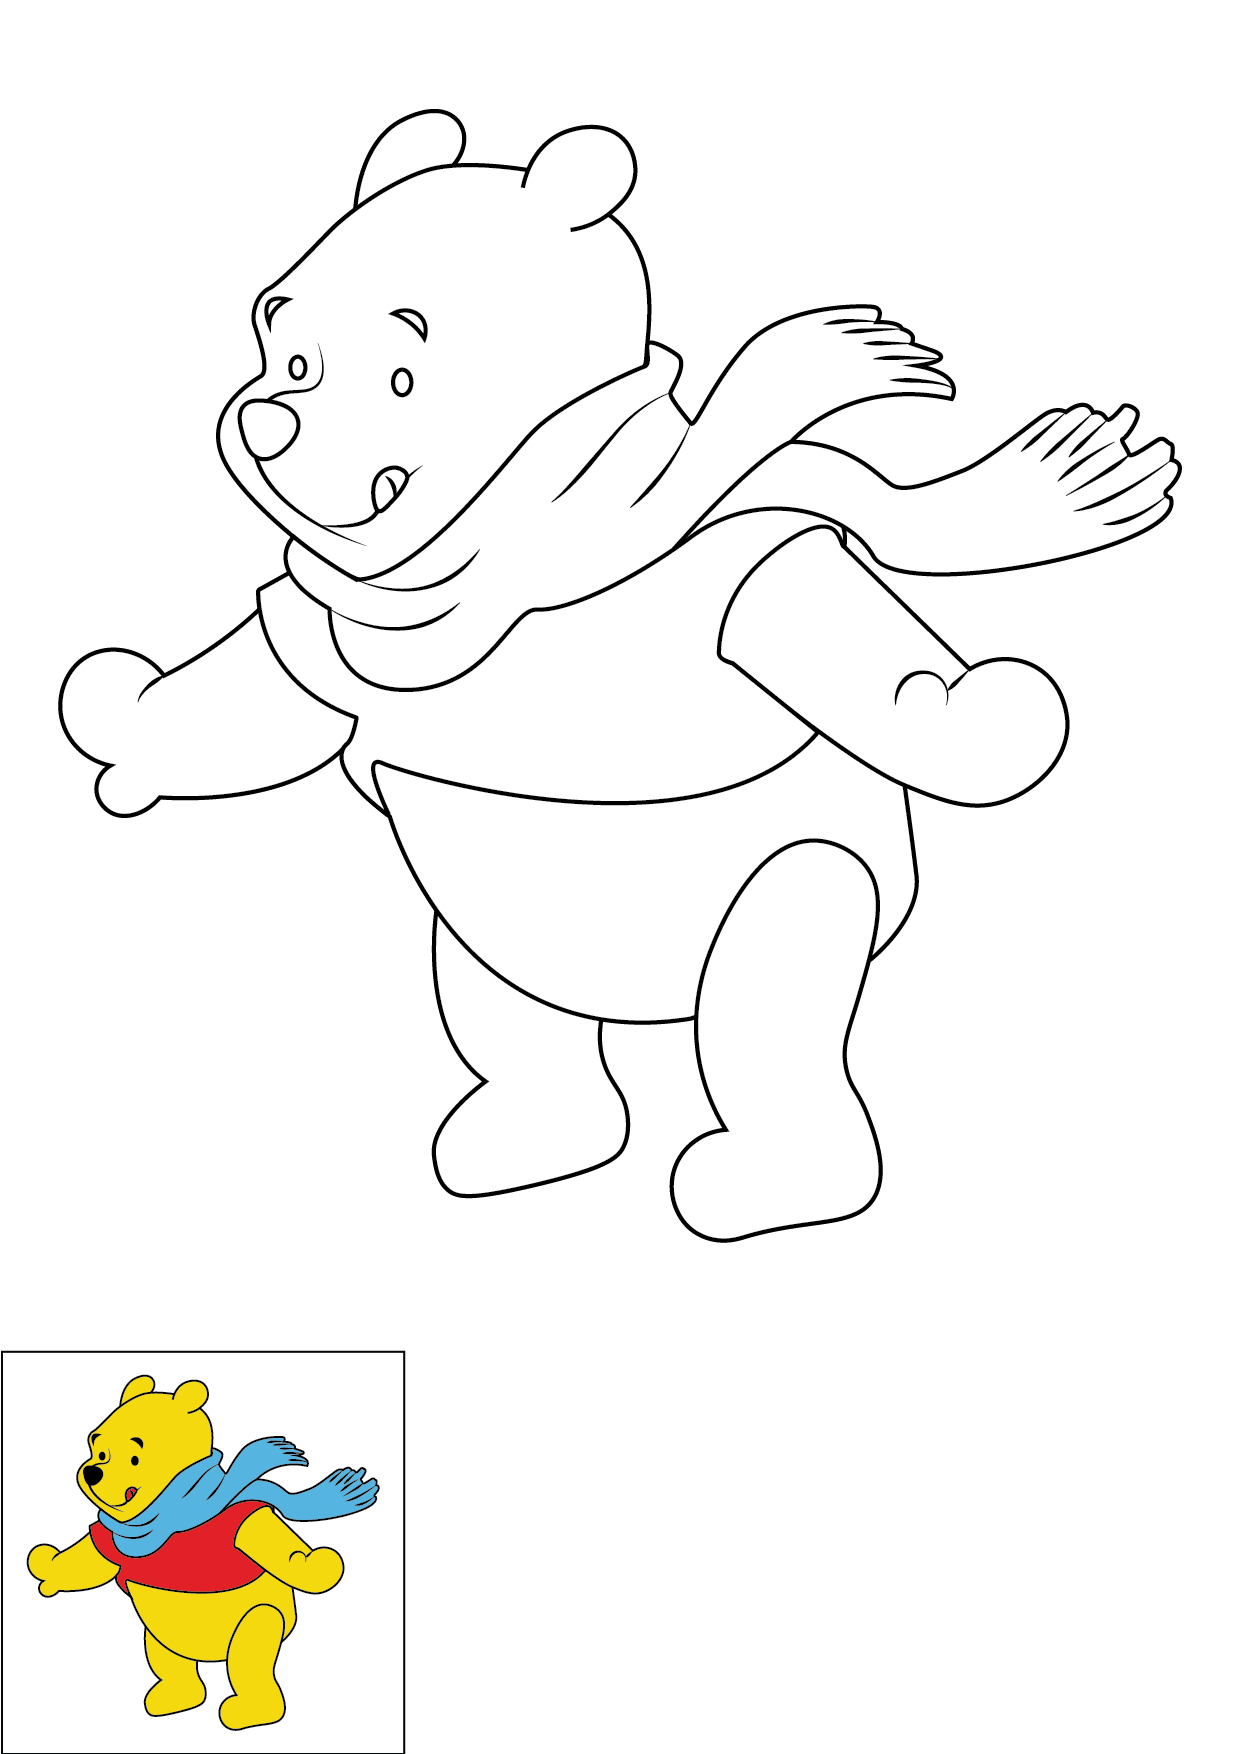 How to Draw Winnie The Pooh Step by Step Printable Color